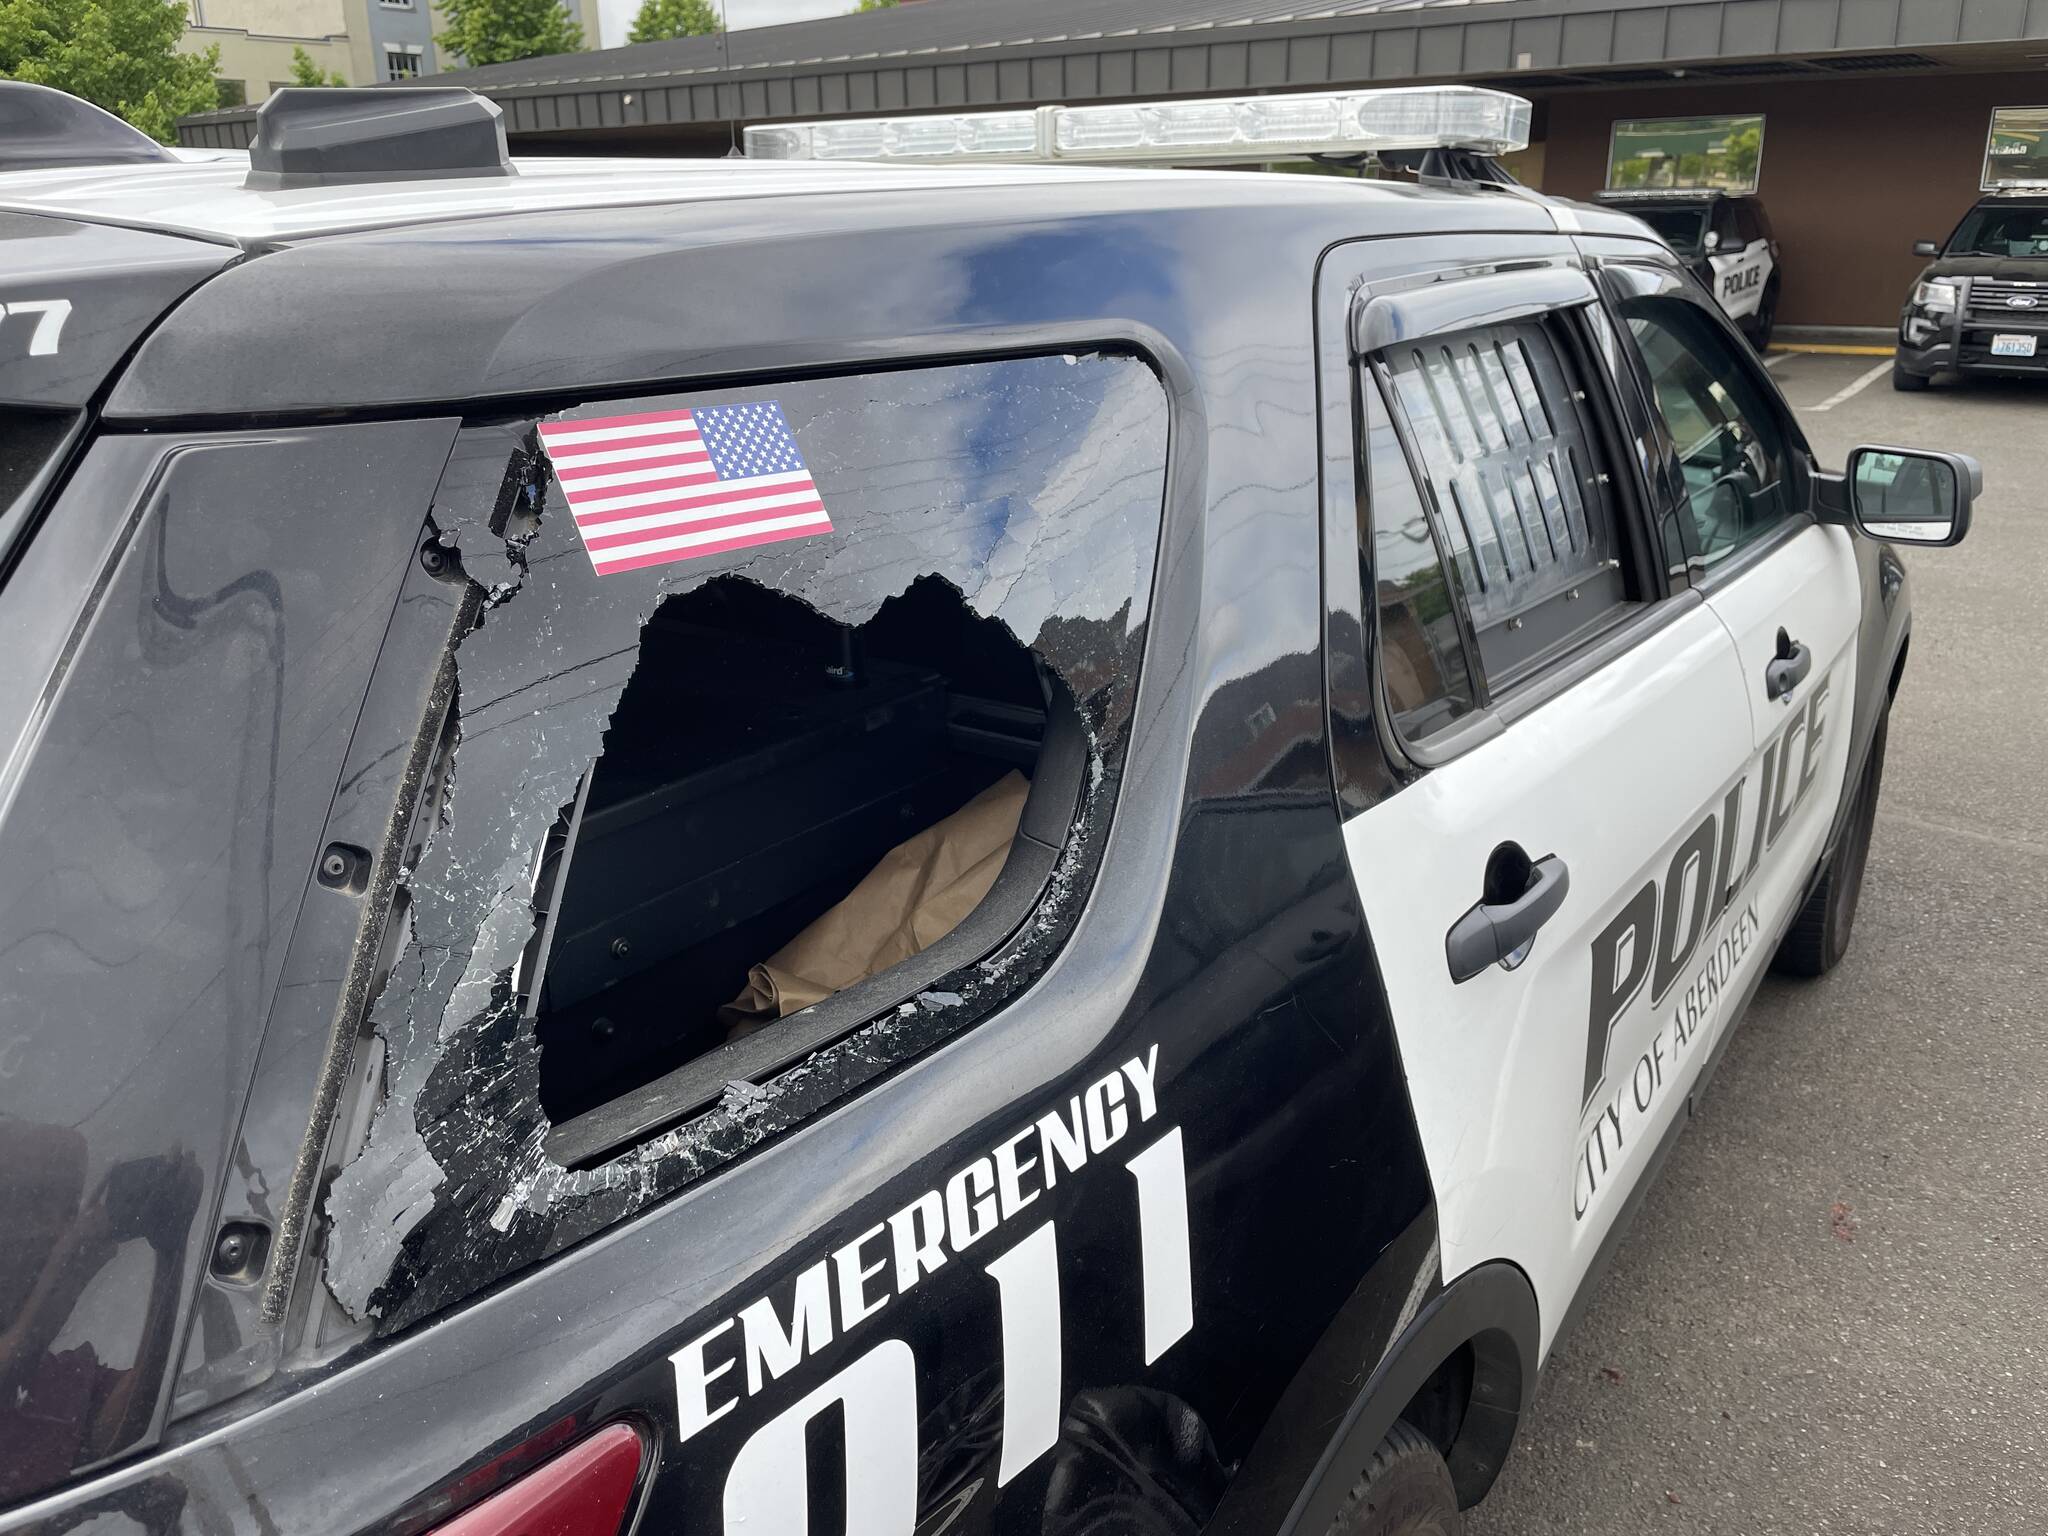 An Aberdeen man headbutted through this police car window as he was being taken to the hospital to evaluate his stupendous blood alcohol content following his arrest for assault on Saturday, July 8. (Michael S. Lockett / The Daily World)